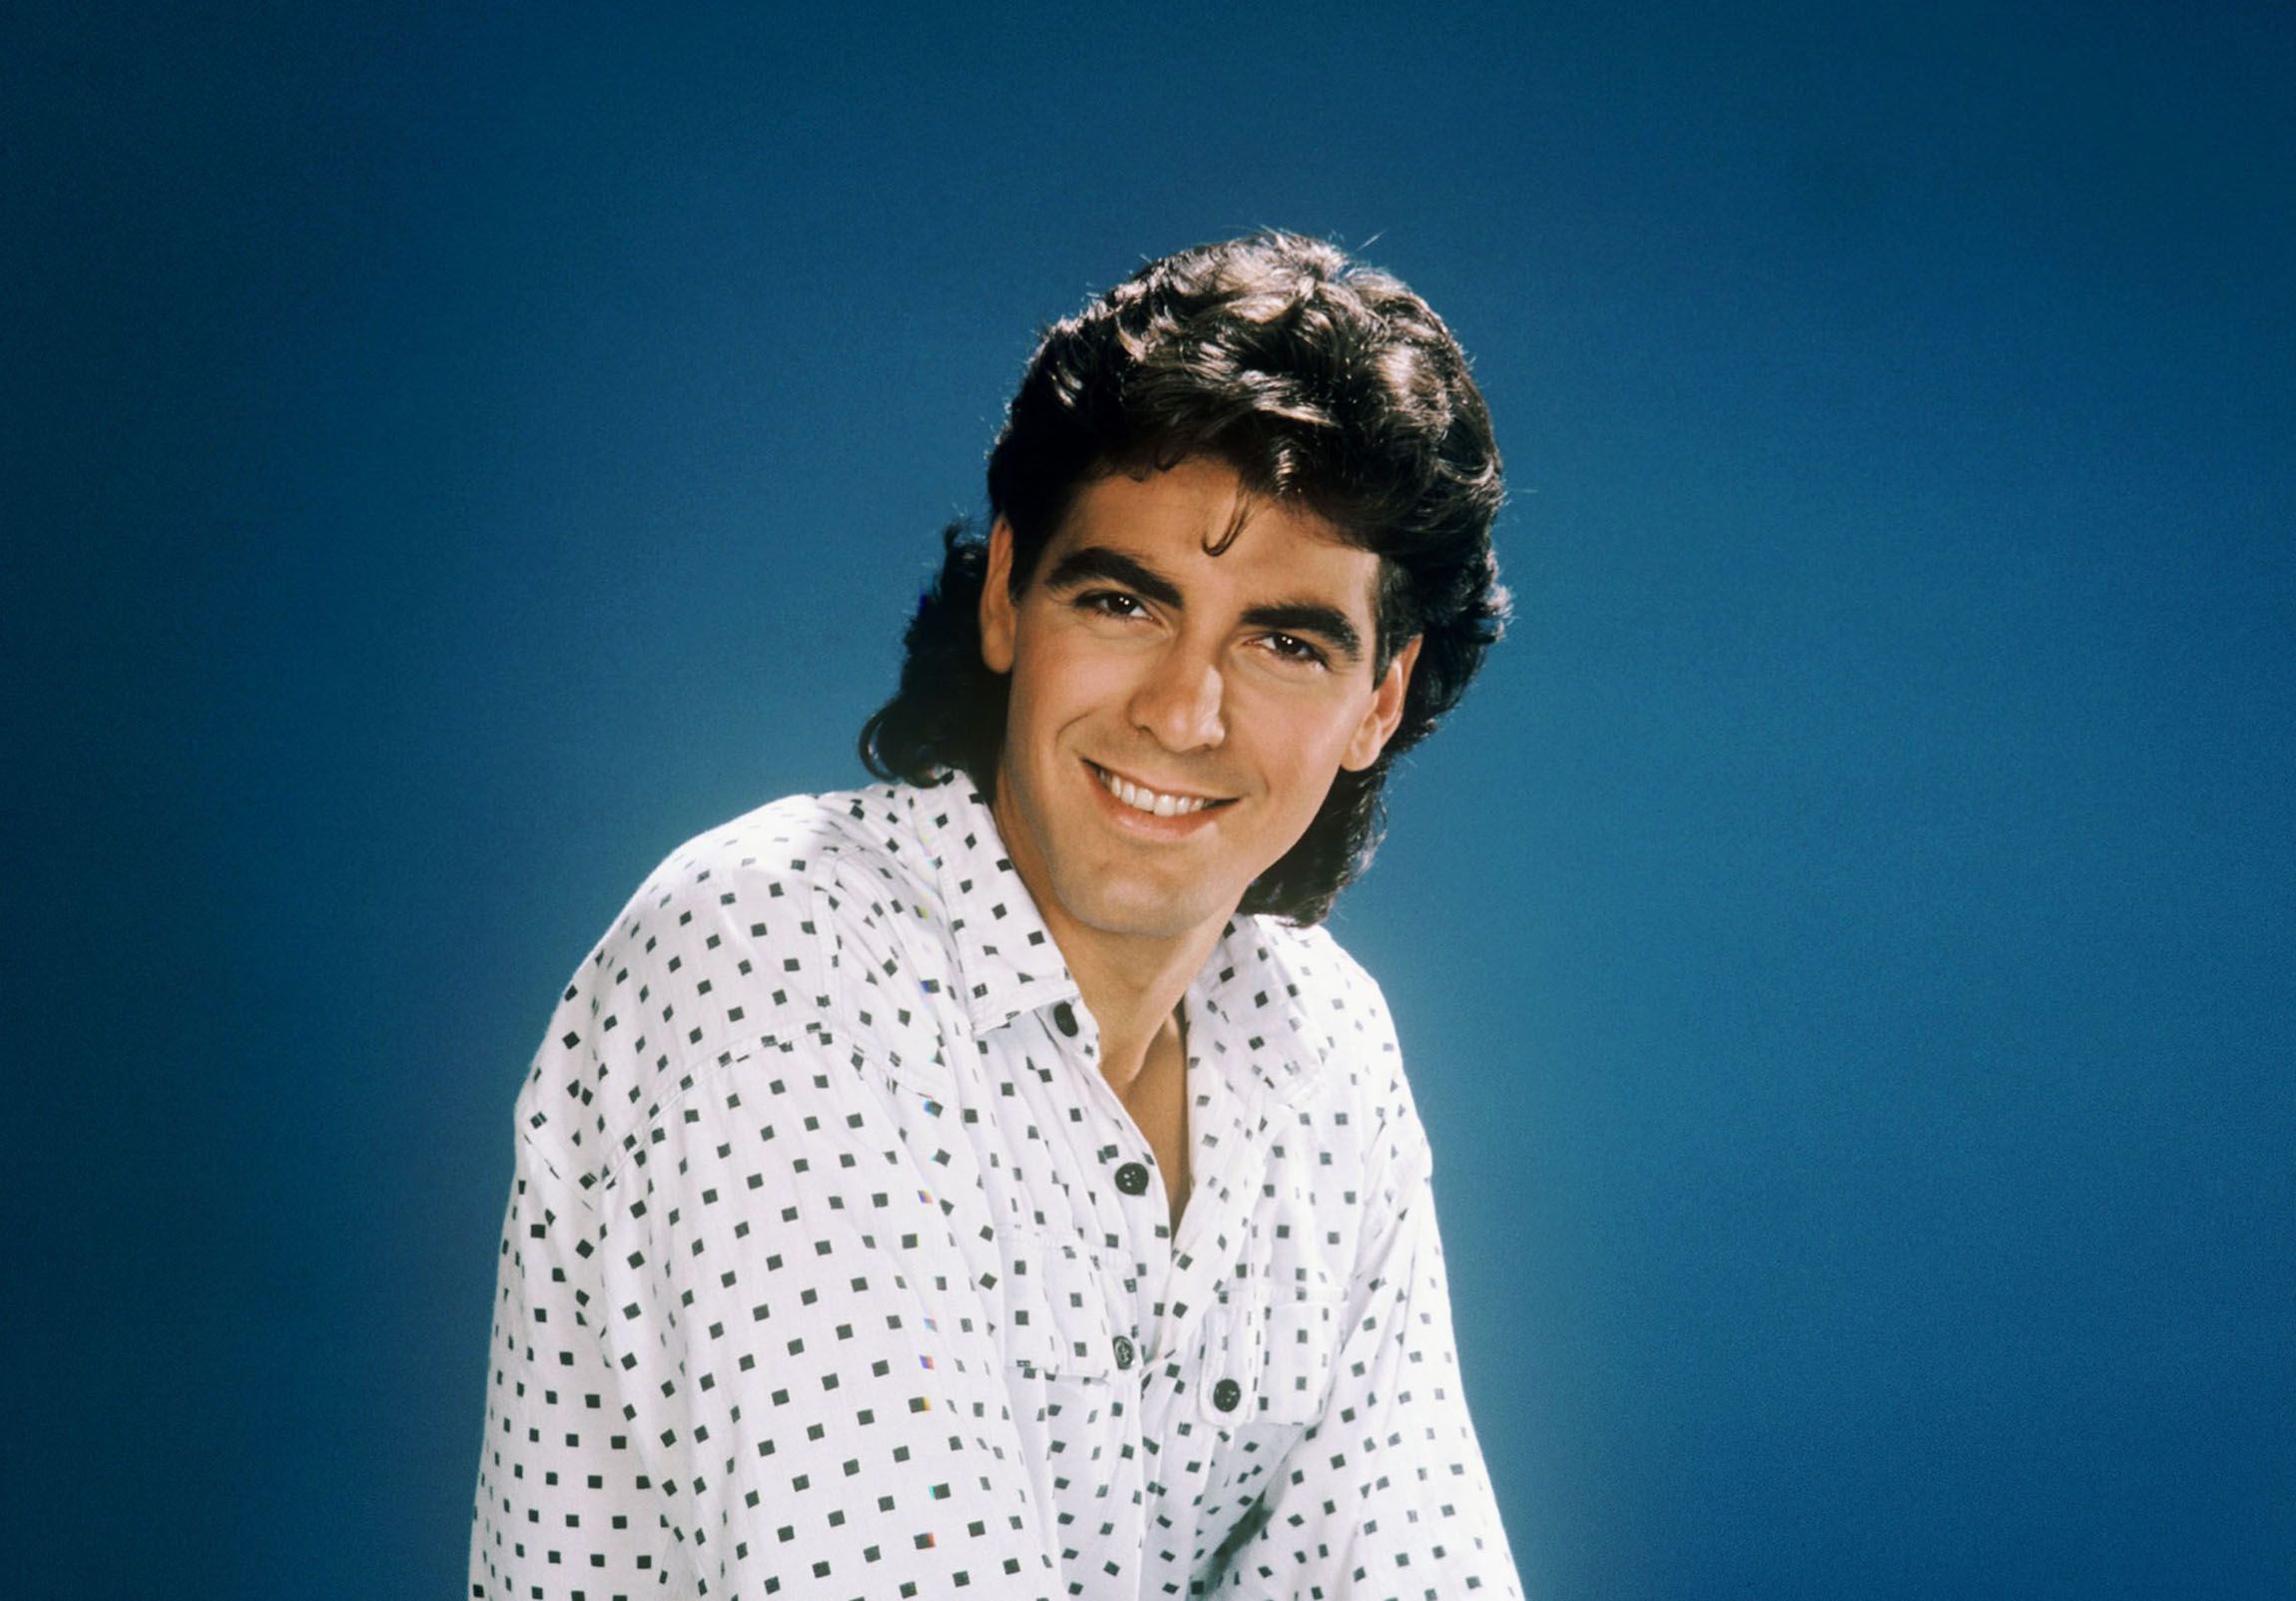 George Clooney Through The Years Photos